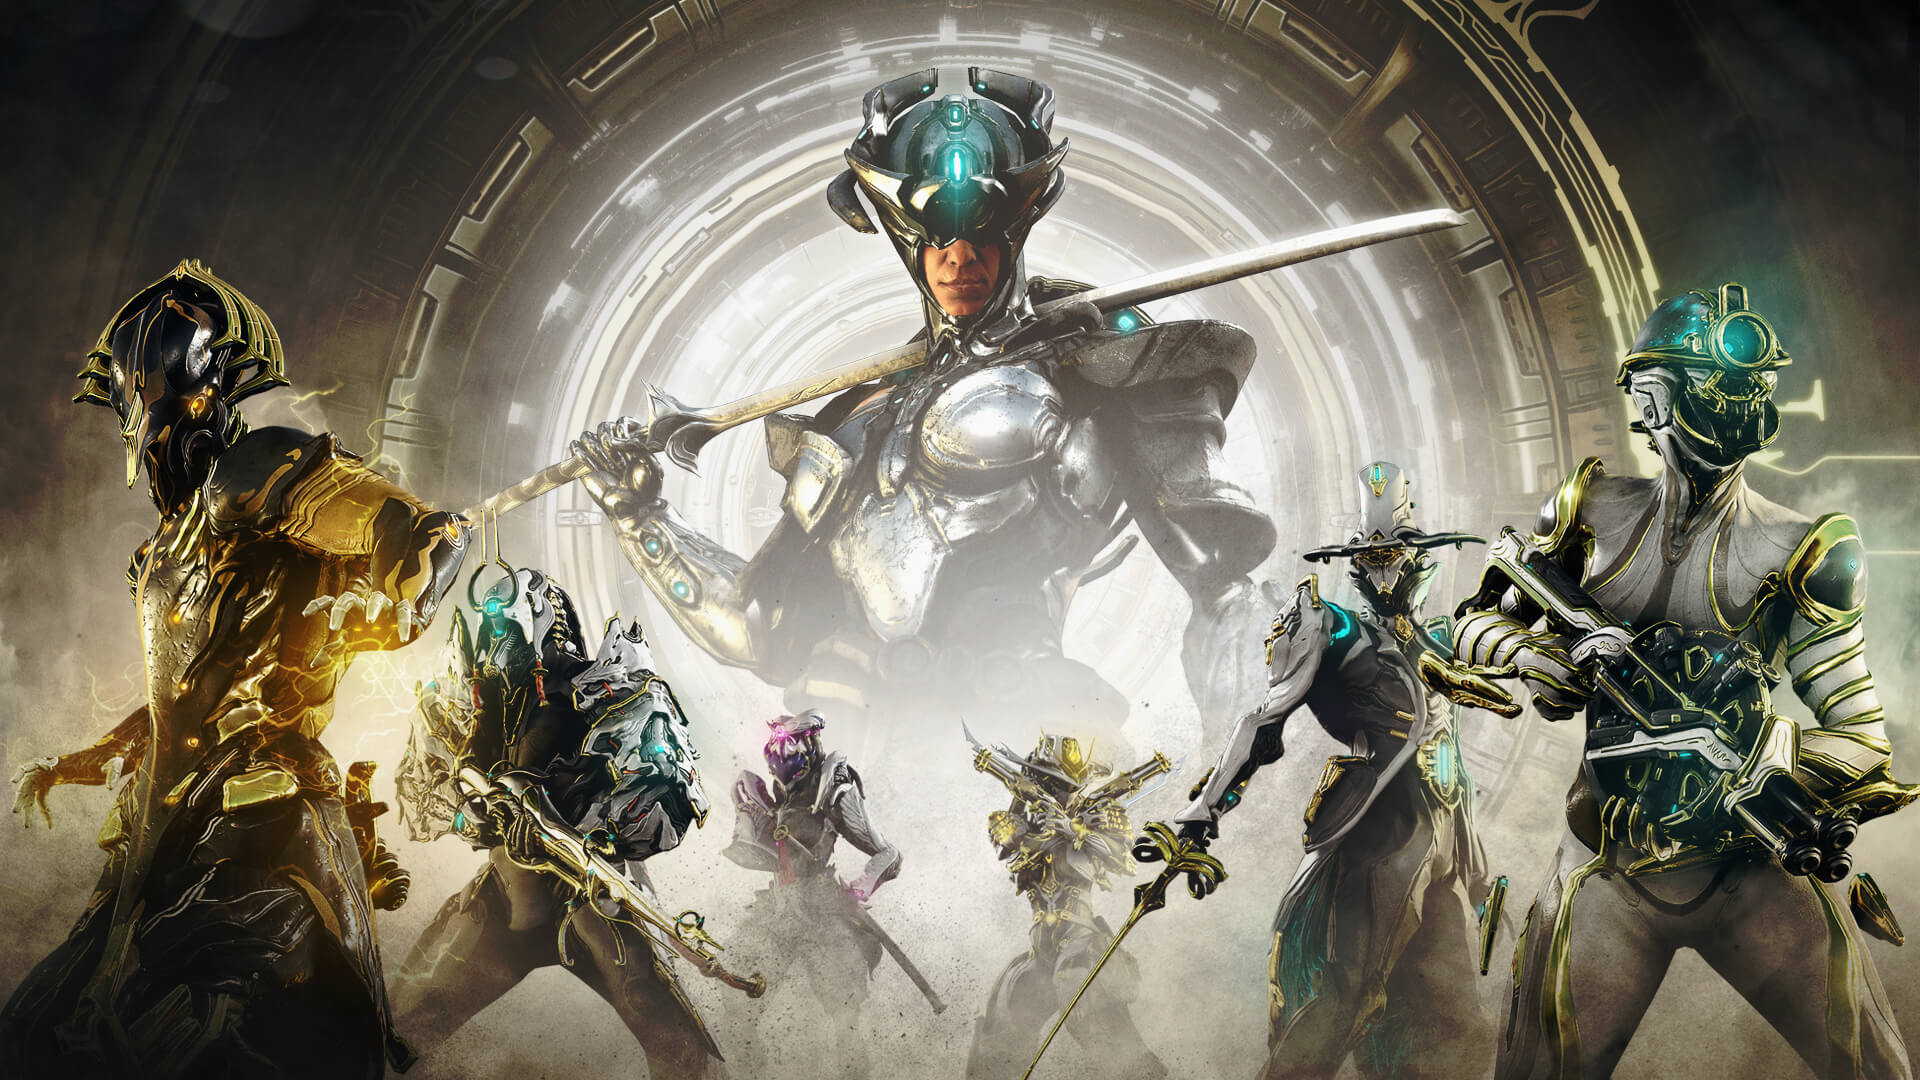 Warframe New 2021 Wallpapers